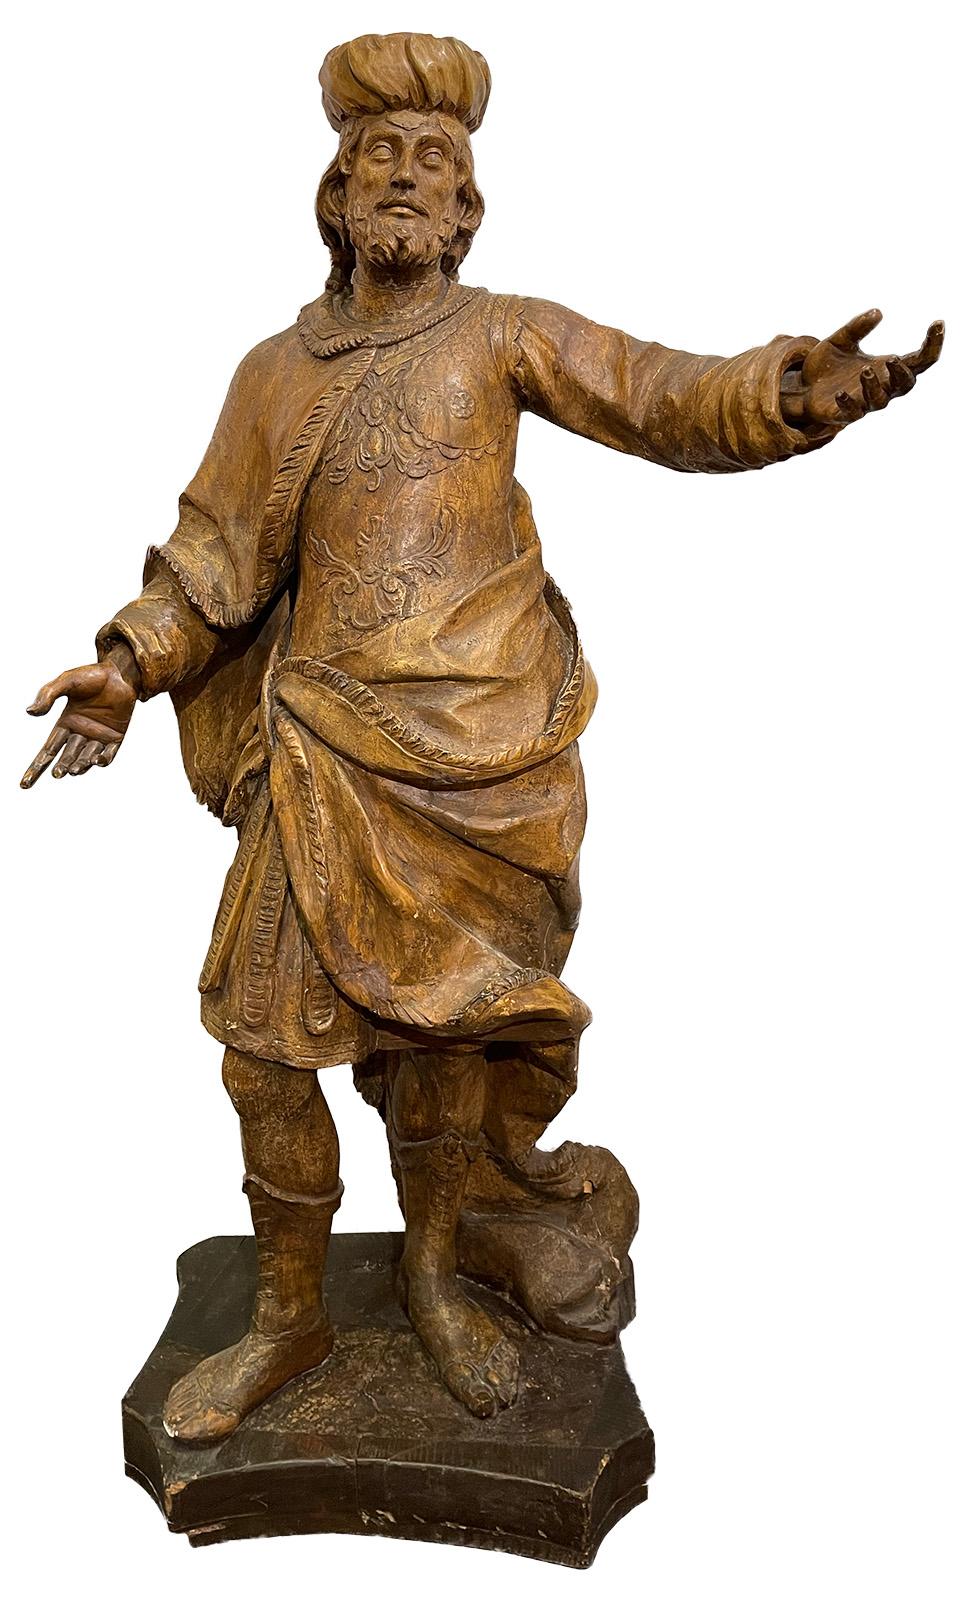 17th century figural statue from Turkey carved from fruitwood and gessoed.

Dimensions: 76